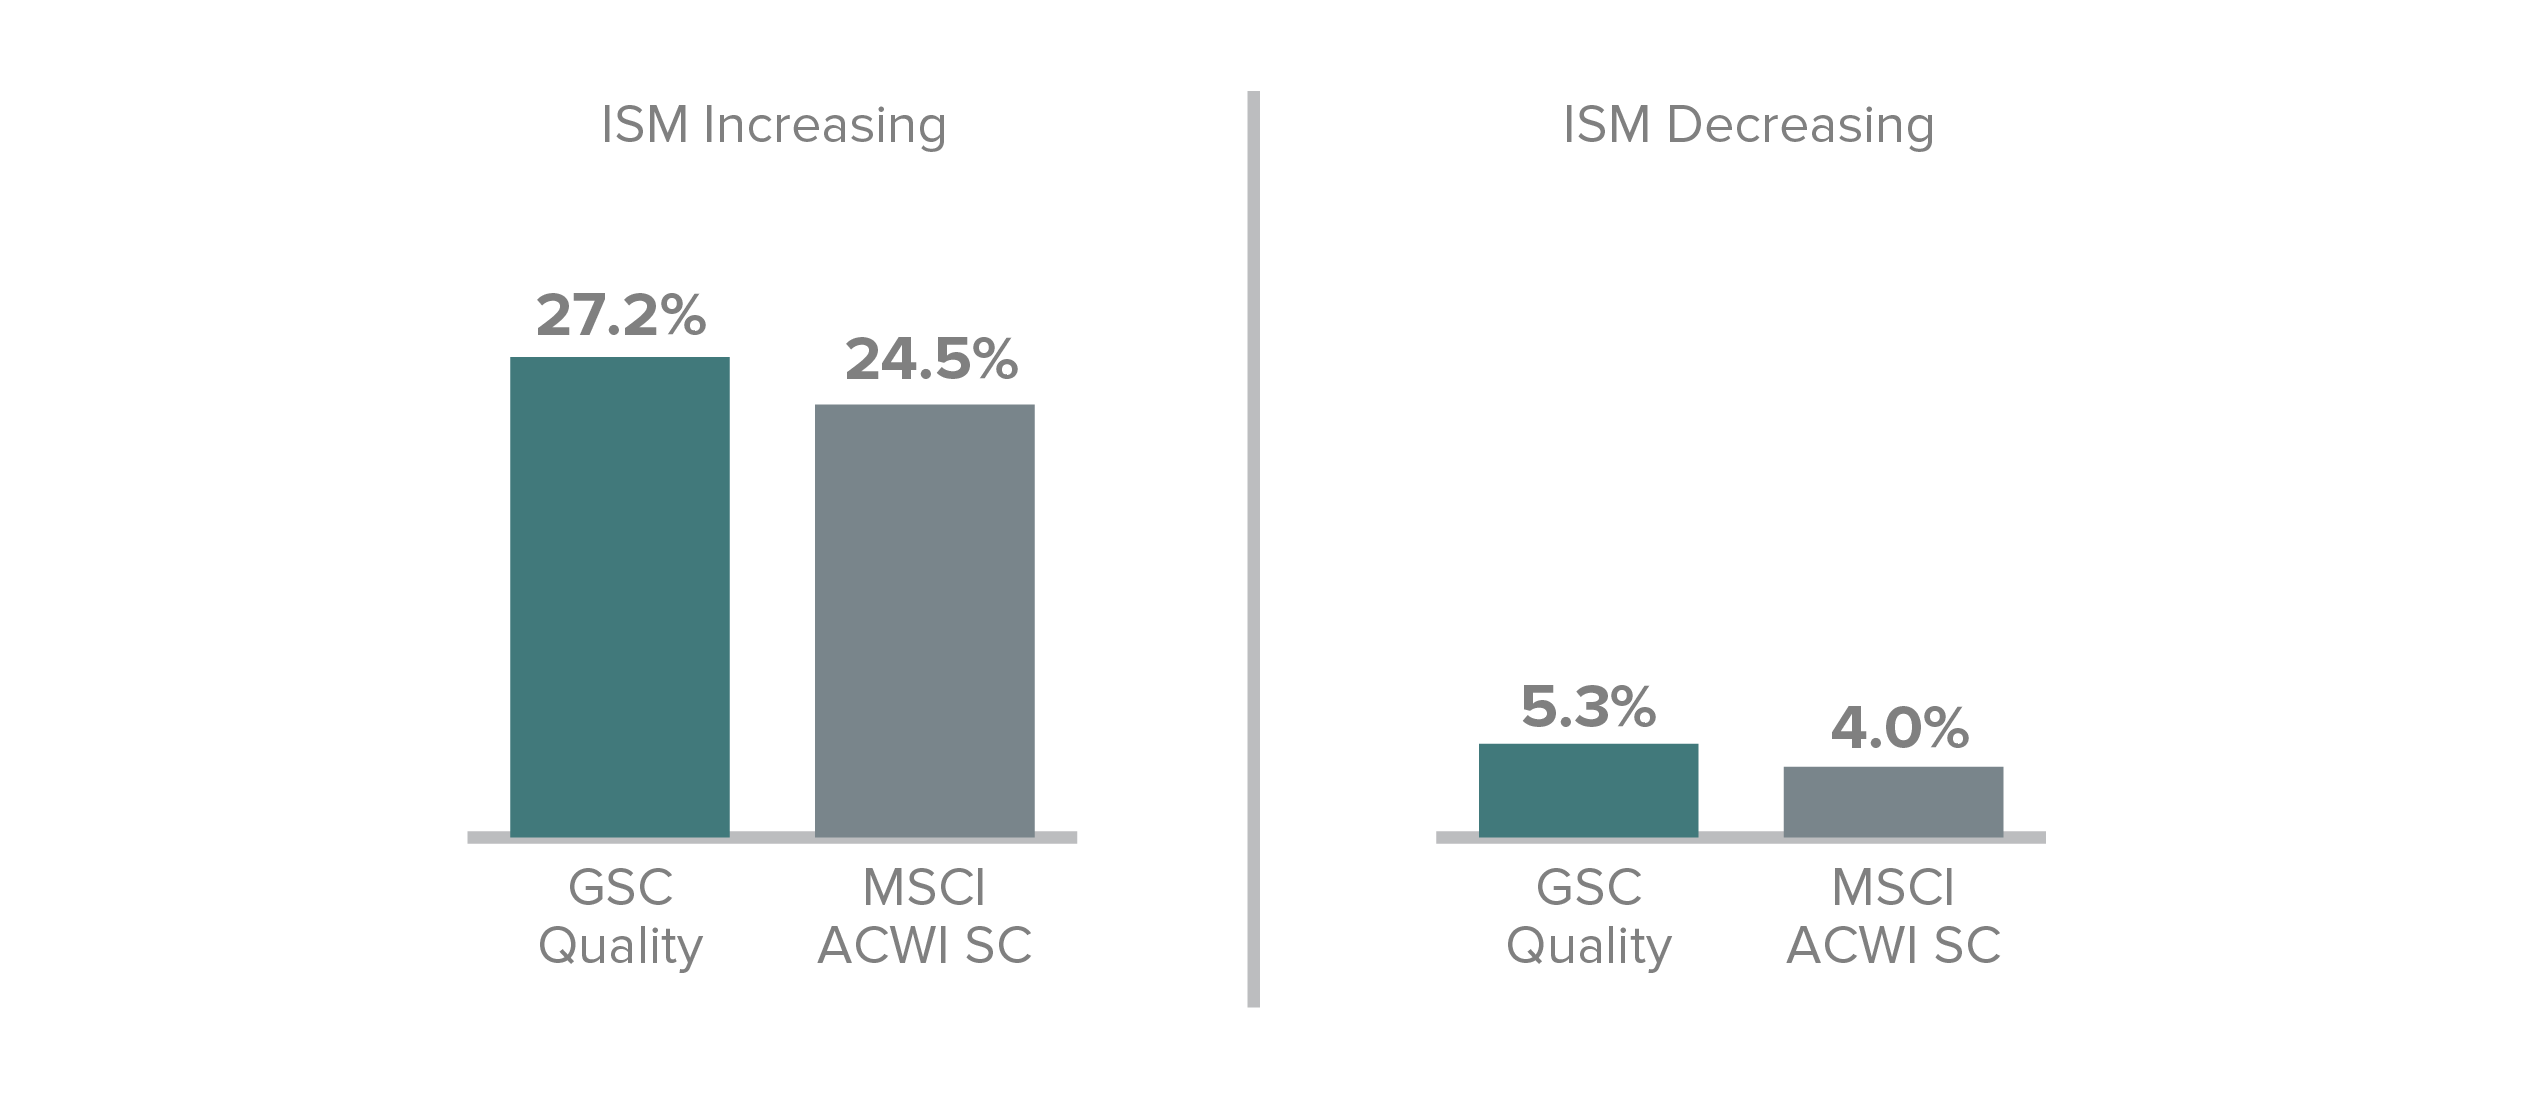 ISM Increasing 27.2% for GSC Quality and 24.5% for MSCI ACQI SC. ISM Decreasing is 5.3% for GSC Quality and 4.0% for MSCI ACWI SC